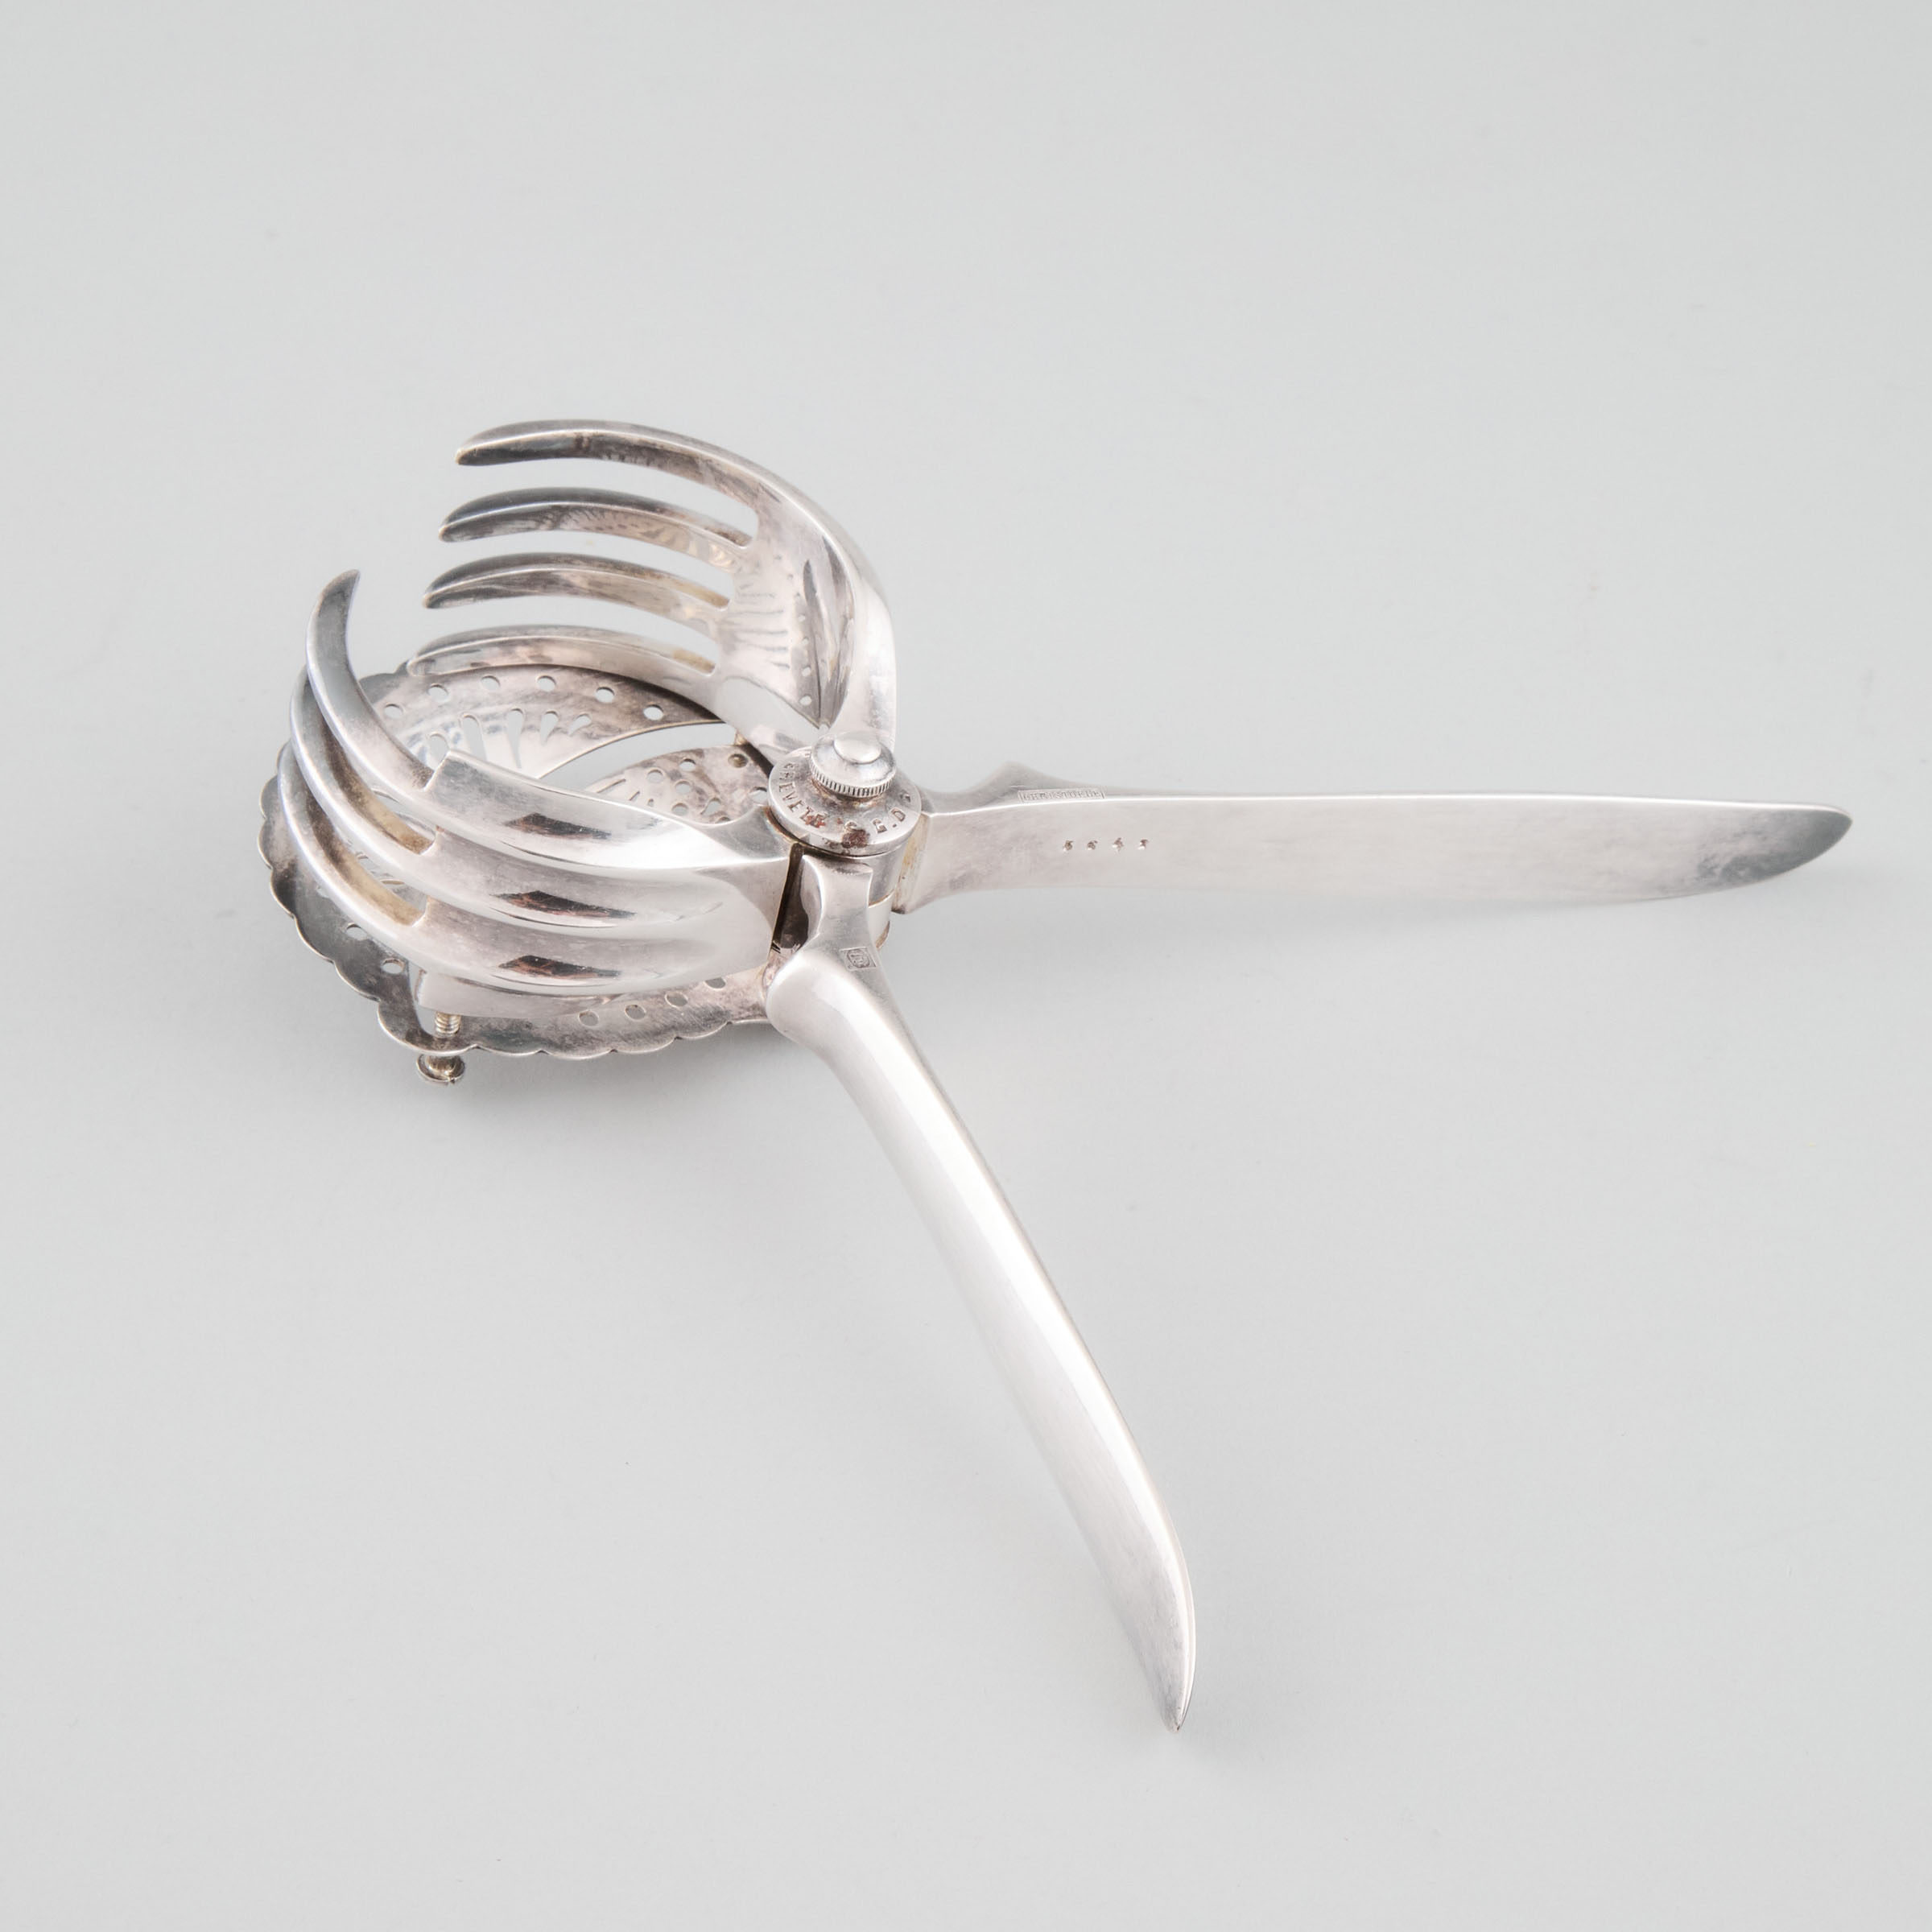 French Silver Plated Lemon Squeezer, Christofle, early 20th century